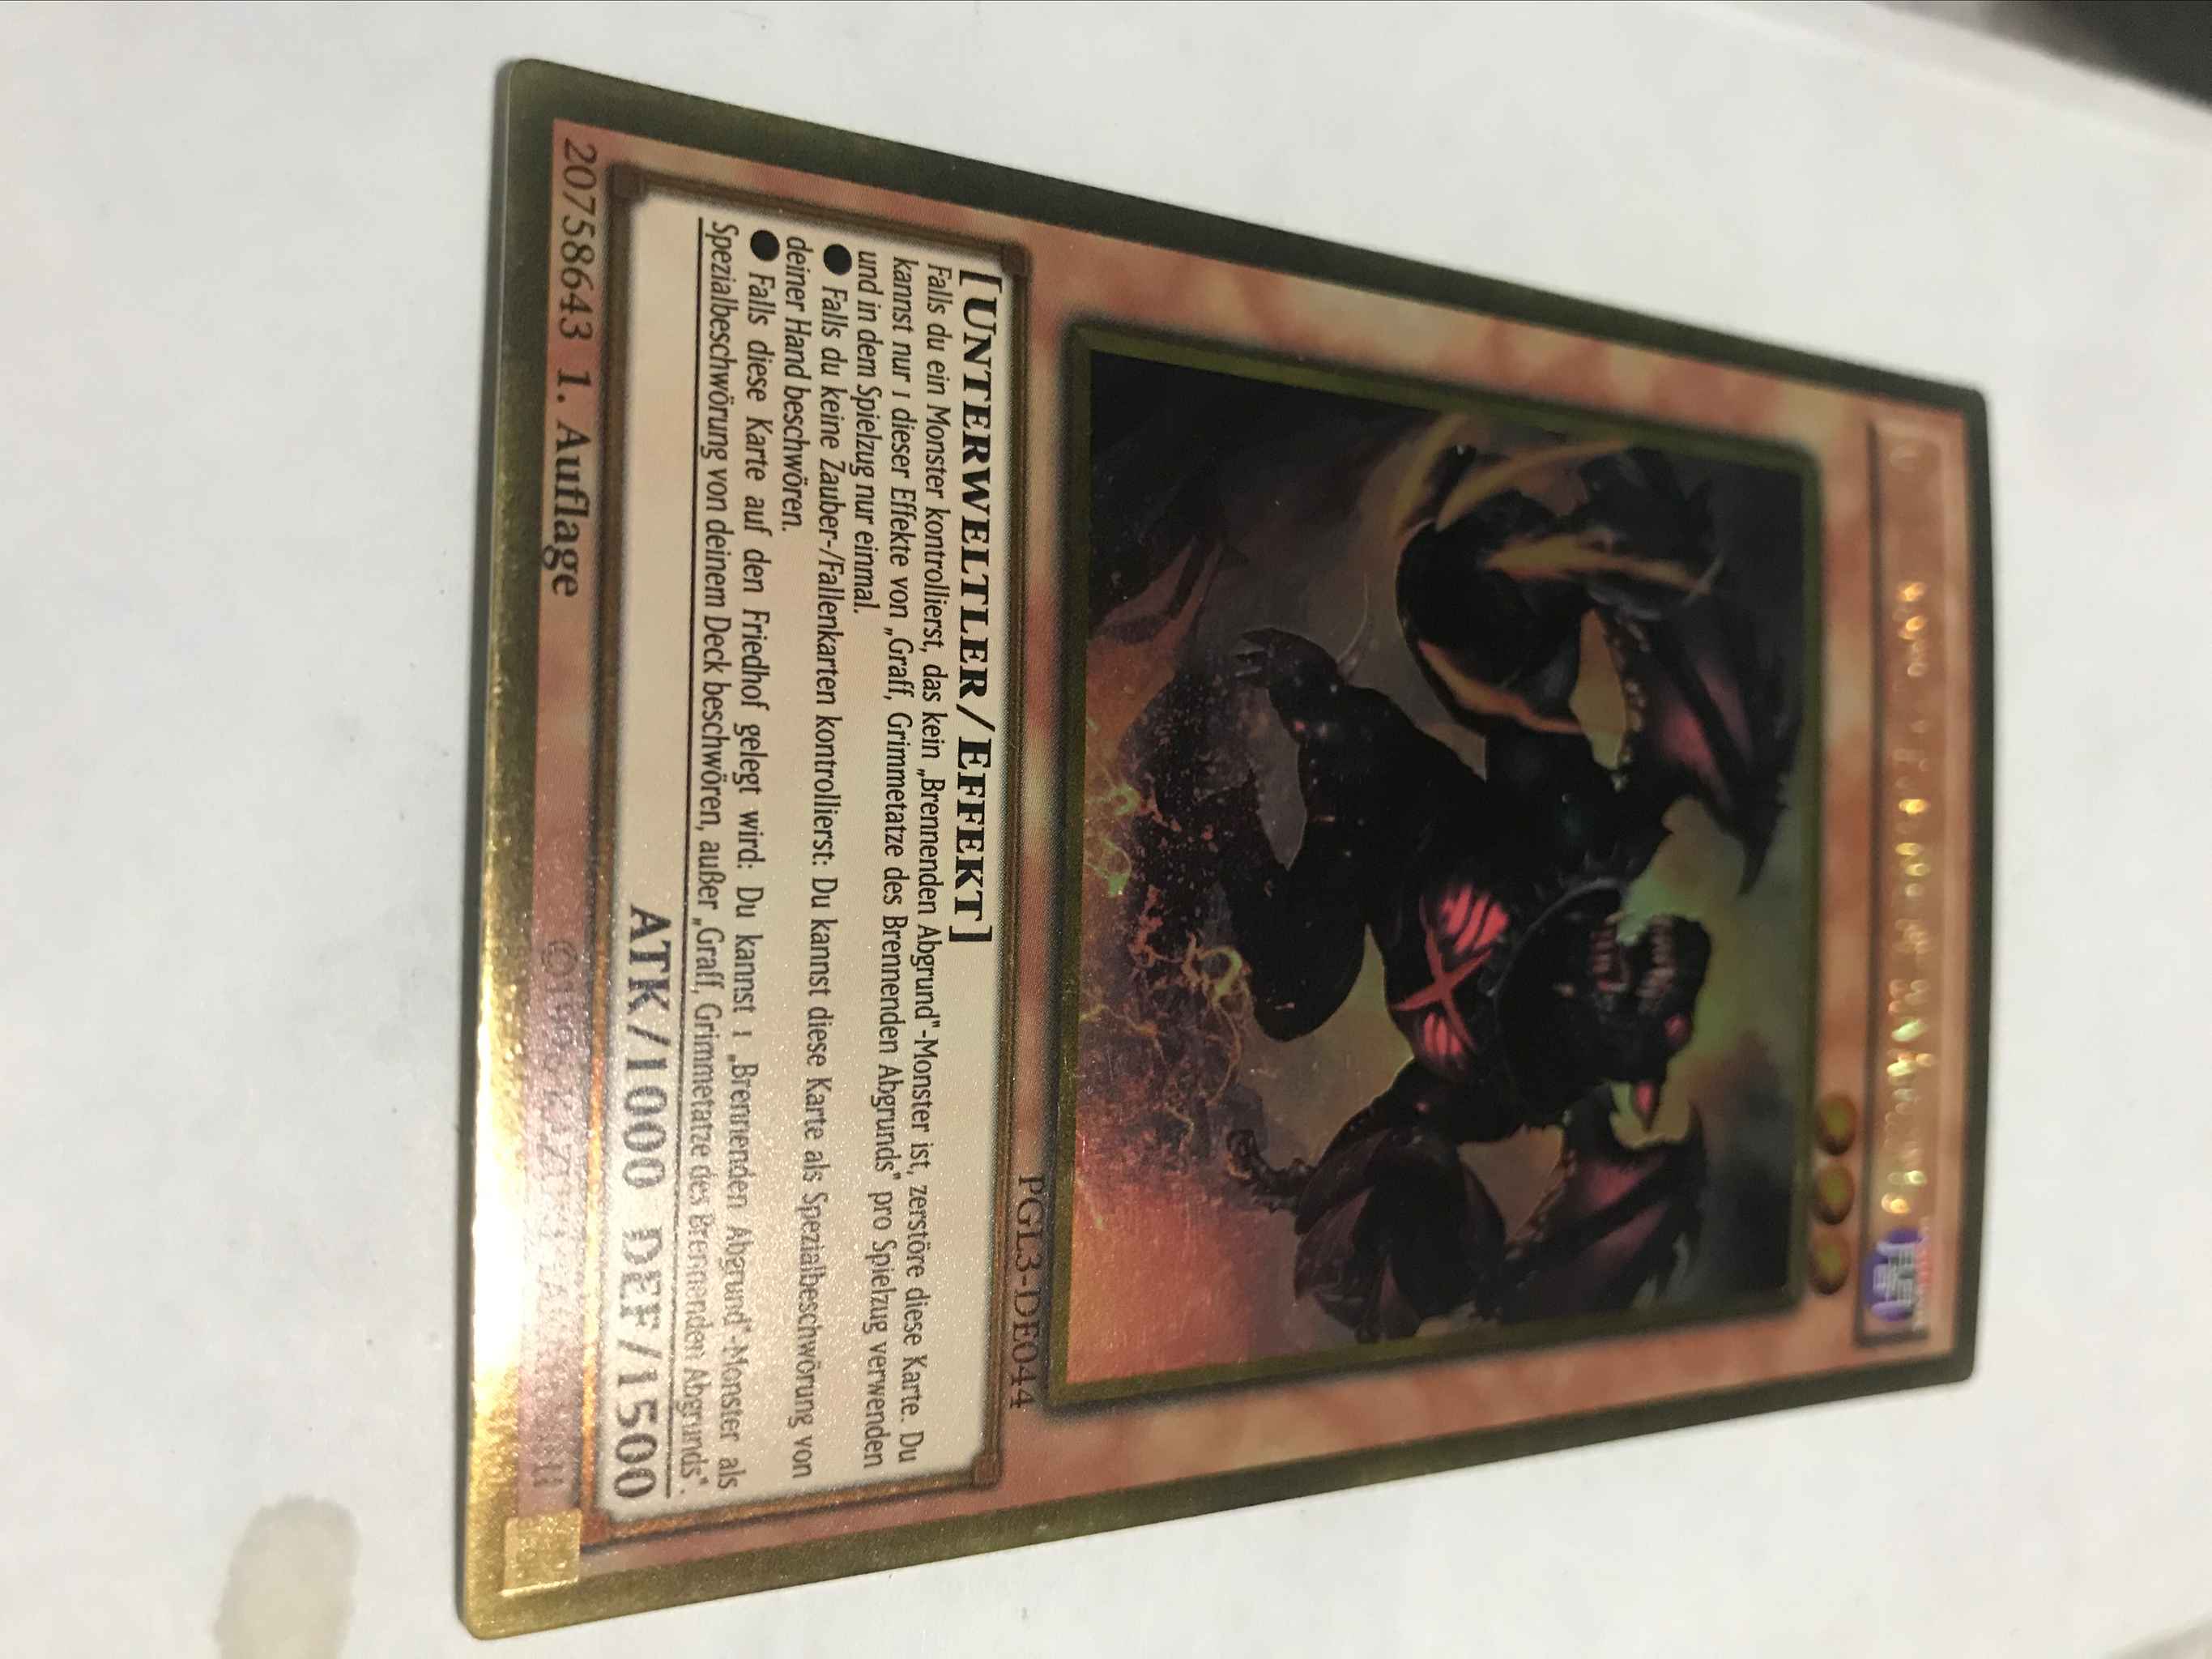 Graff PGL3-EN044 Gold Rare 1st Edition NM Malebranche of the Burning Abyss